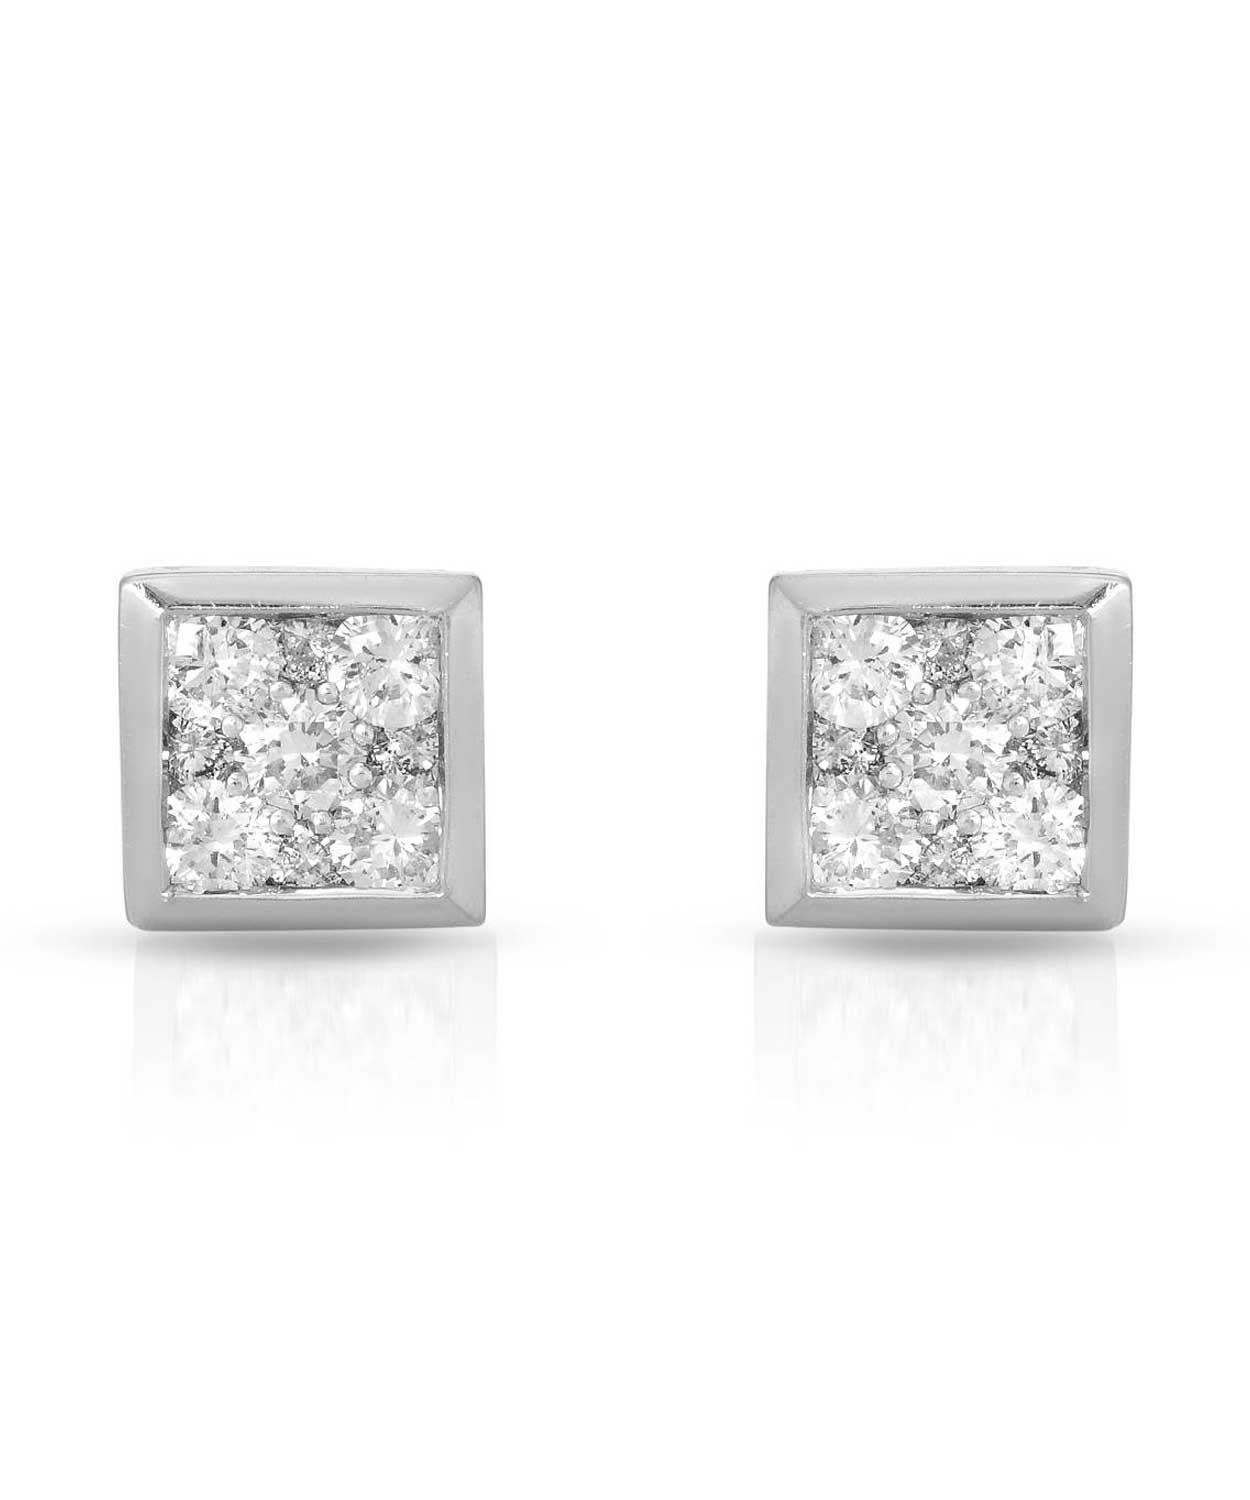 Signature Collection 1.00 ctw Diamond 14k White Gold Square Stud Earrings View 1